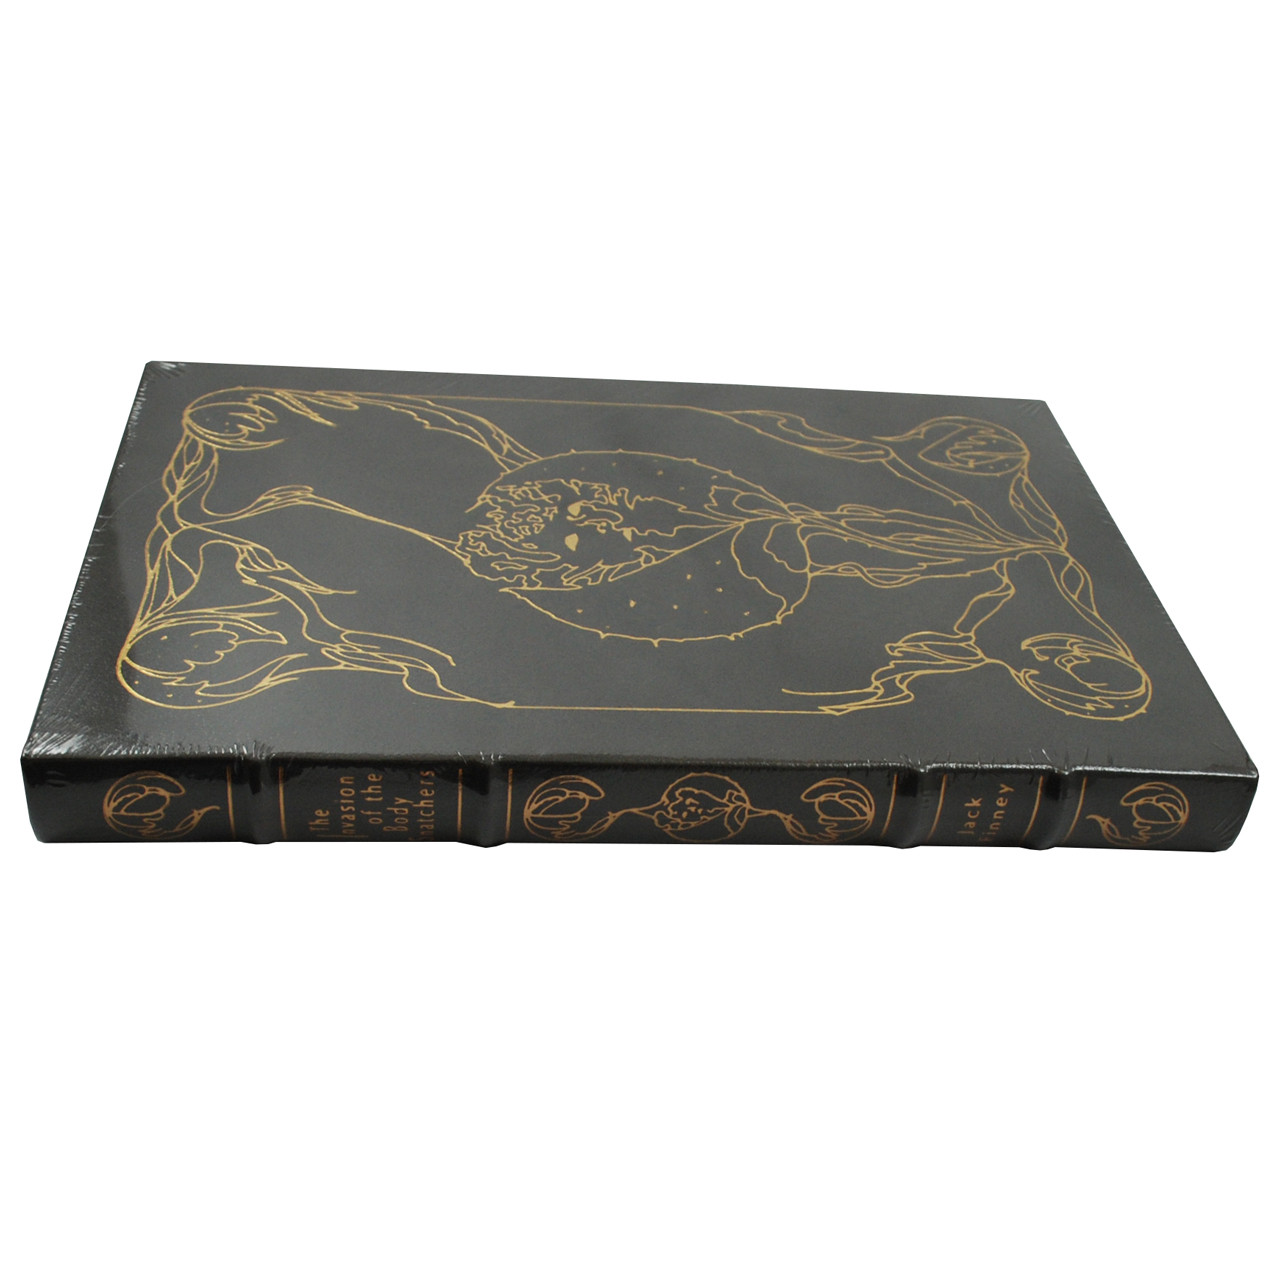 Jack Finney "The Invasion of the Body Snatchers" Limited Edition, Leather Bound Collector's Edition [Sealed]